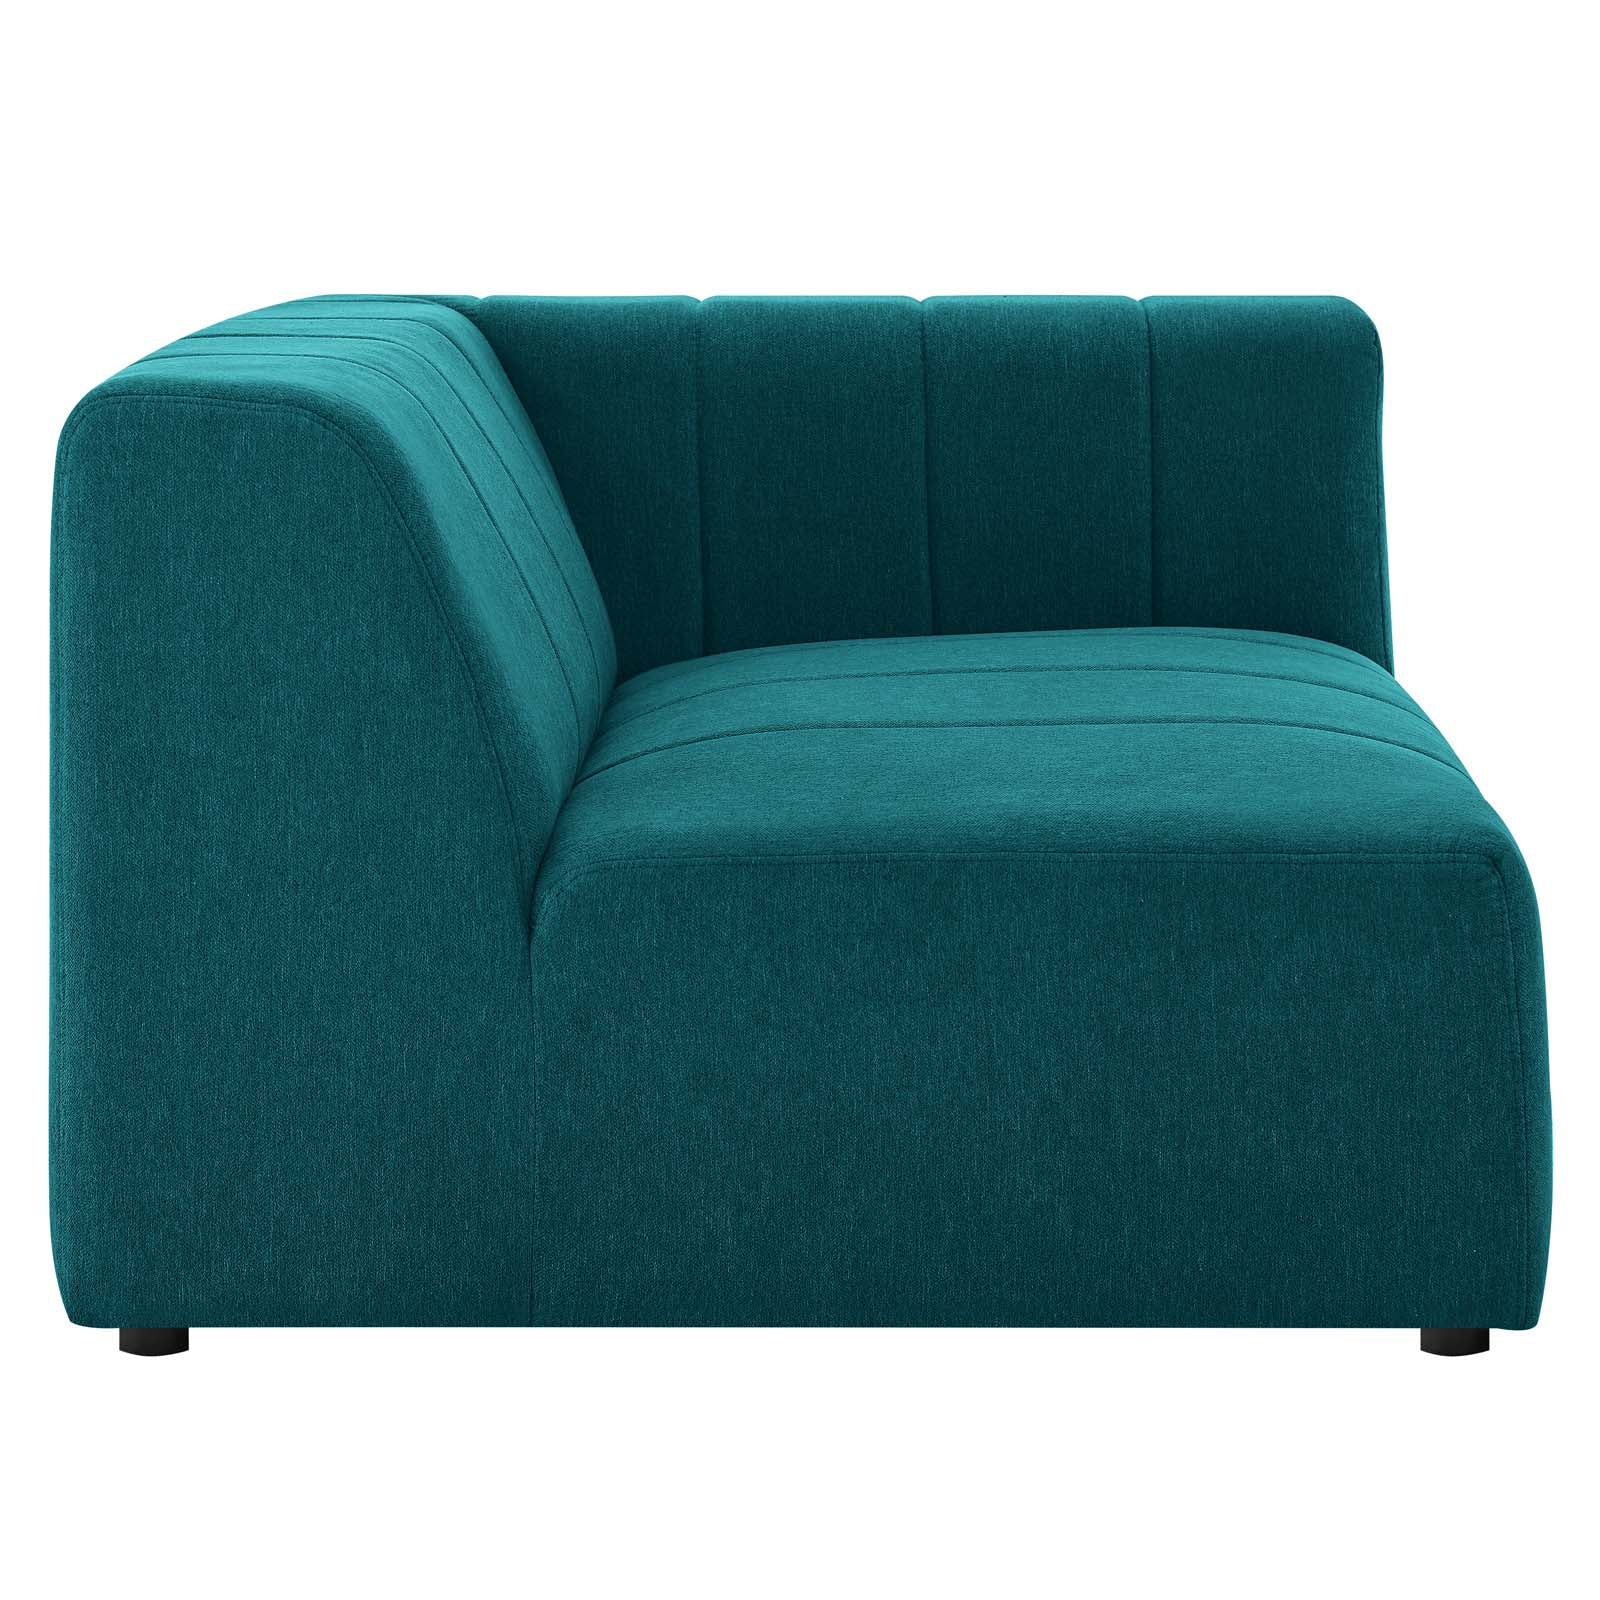 Modway Sofas & Couches - Bartlett Upholstered Fabric 3-Piece Sofa Teal